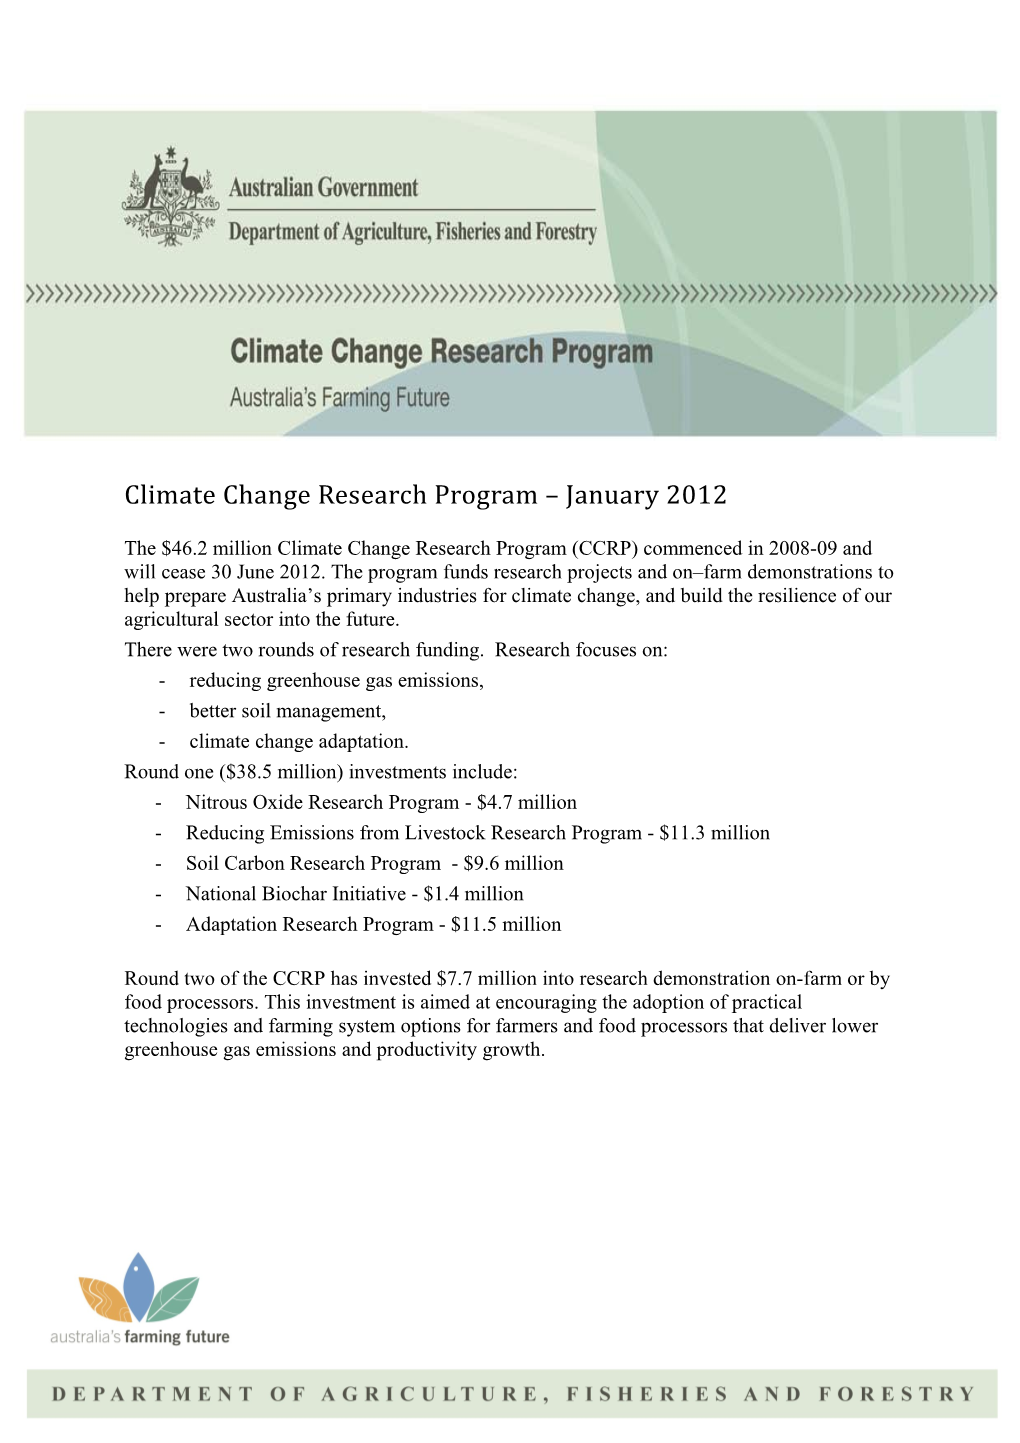 Climate Change Research Program January 2012